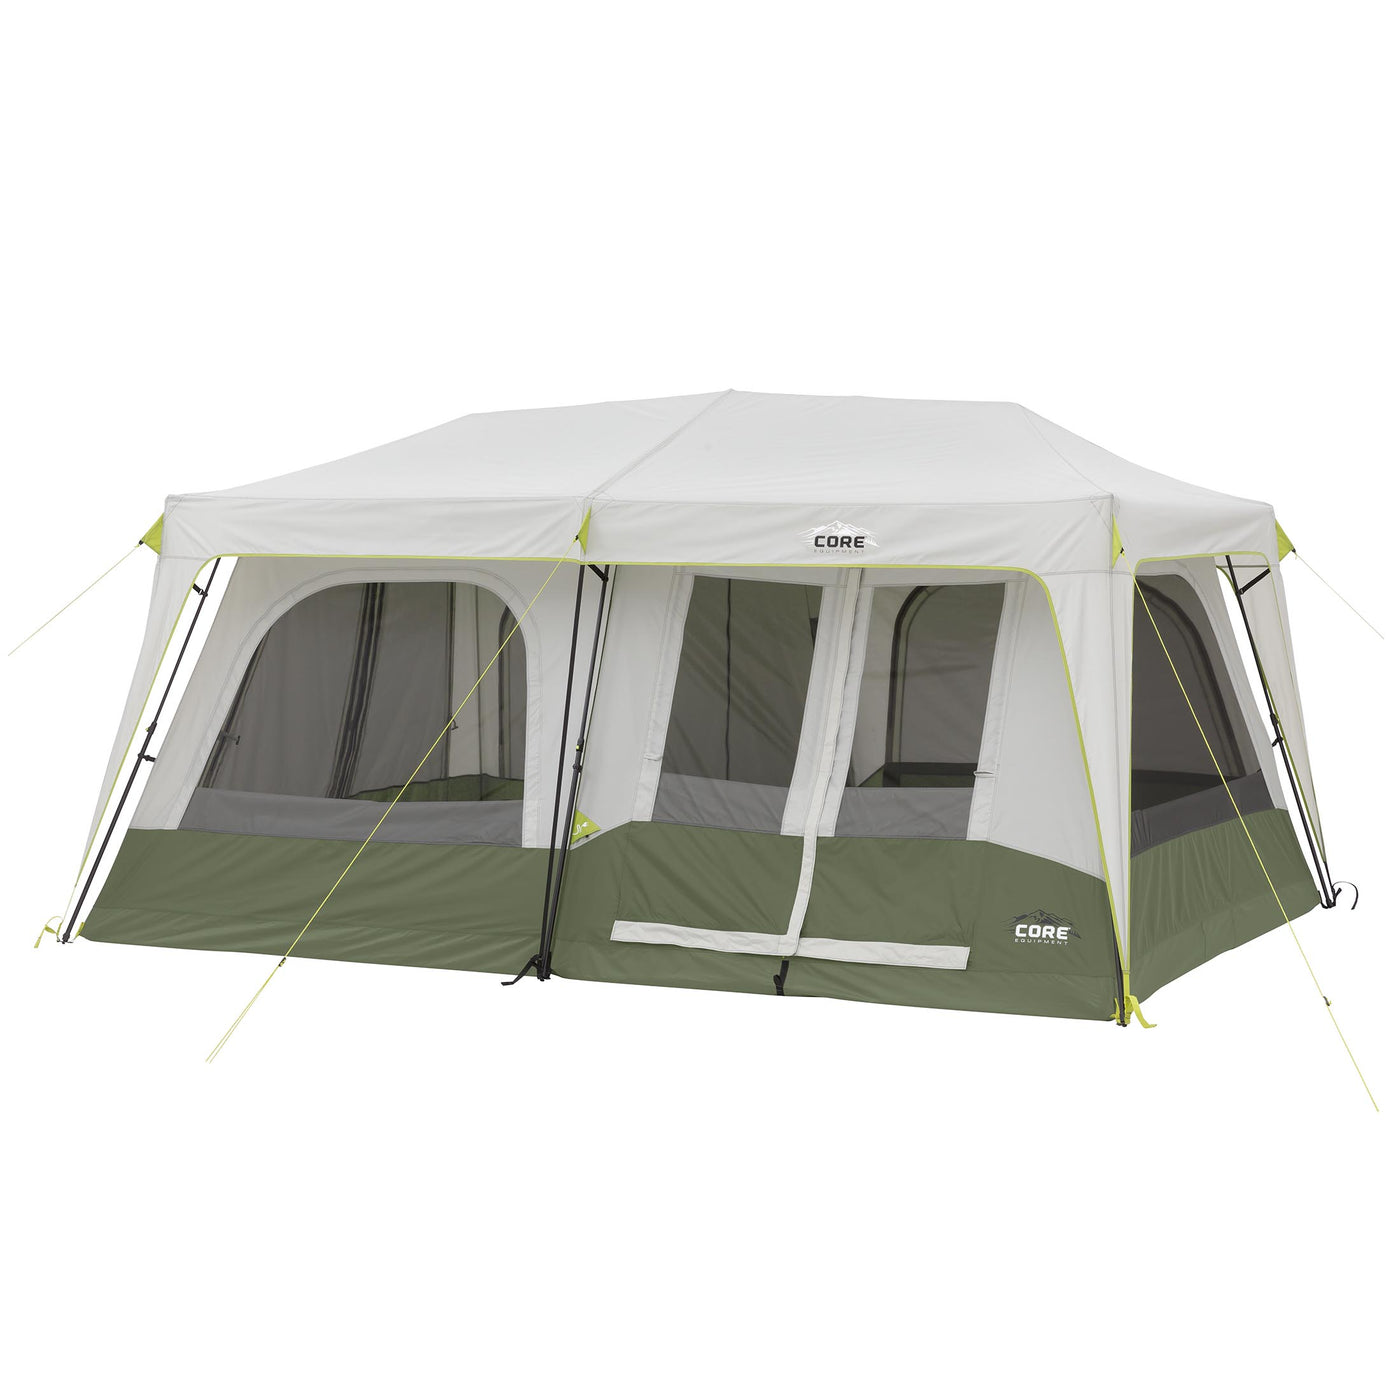  Outdoor Products Camping Tent - Instant Cabin Tent